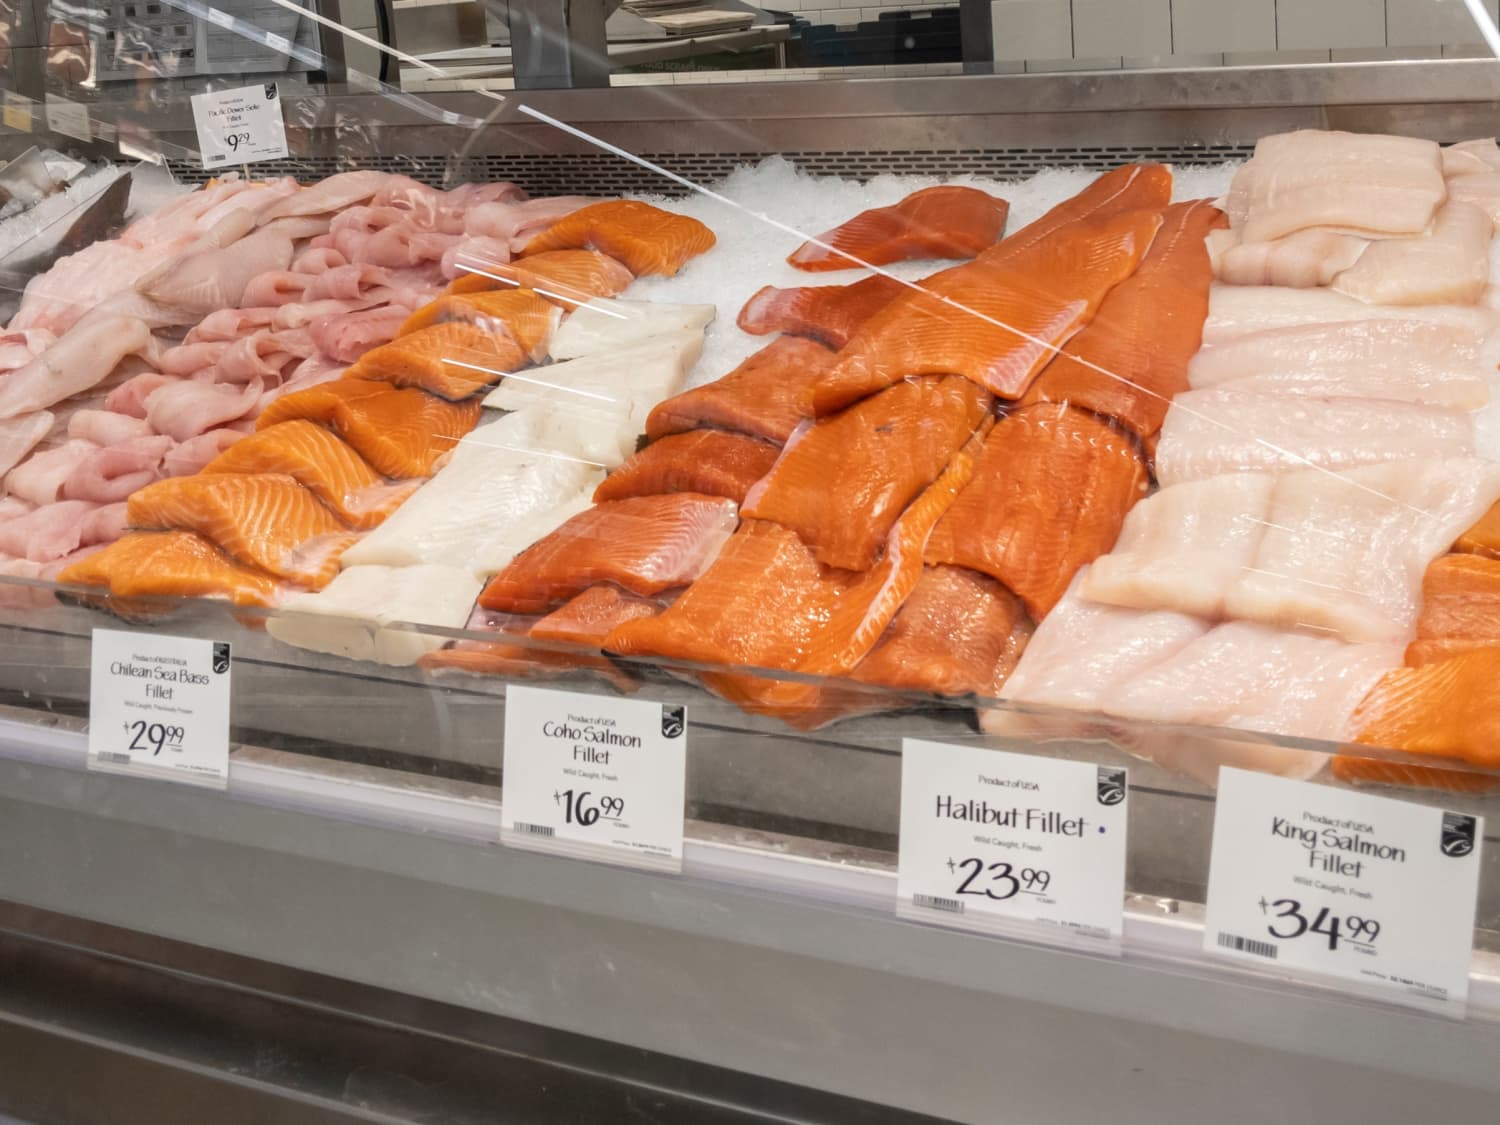 Seafood at Whole Foods Market